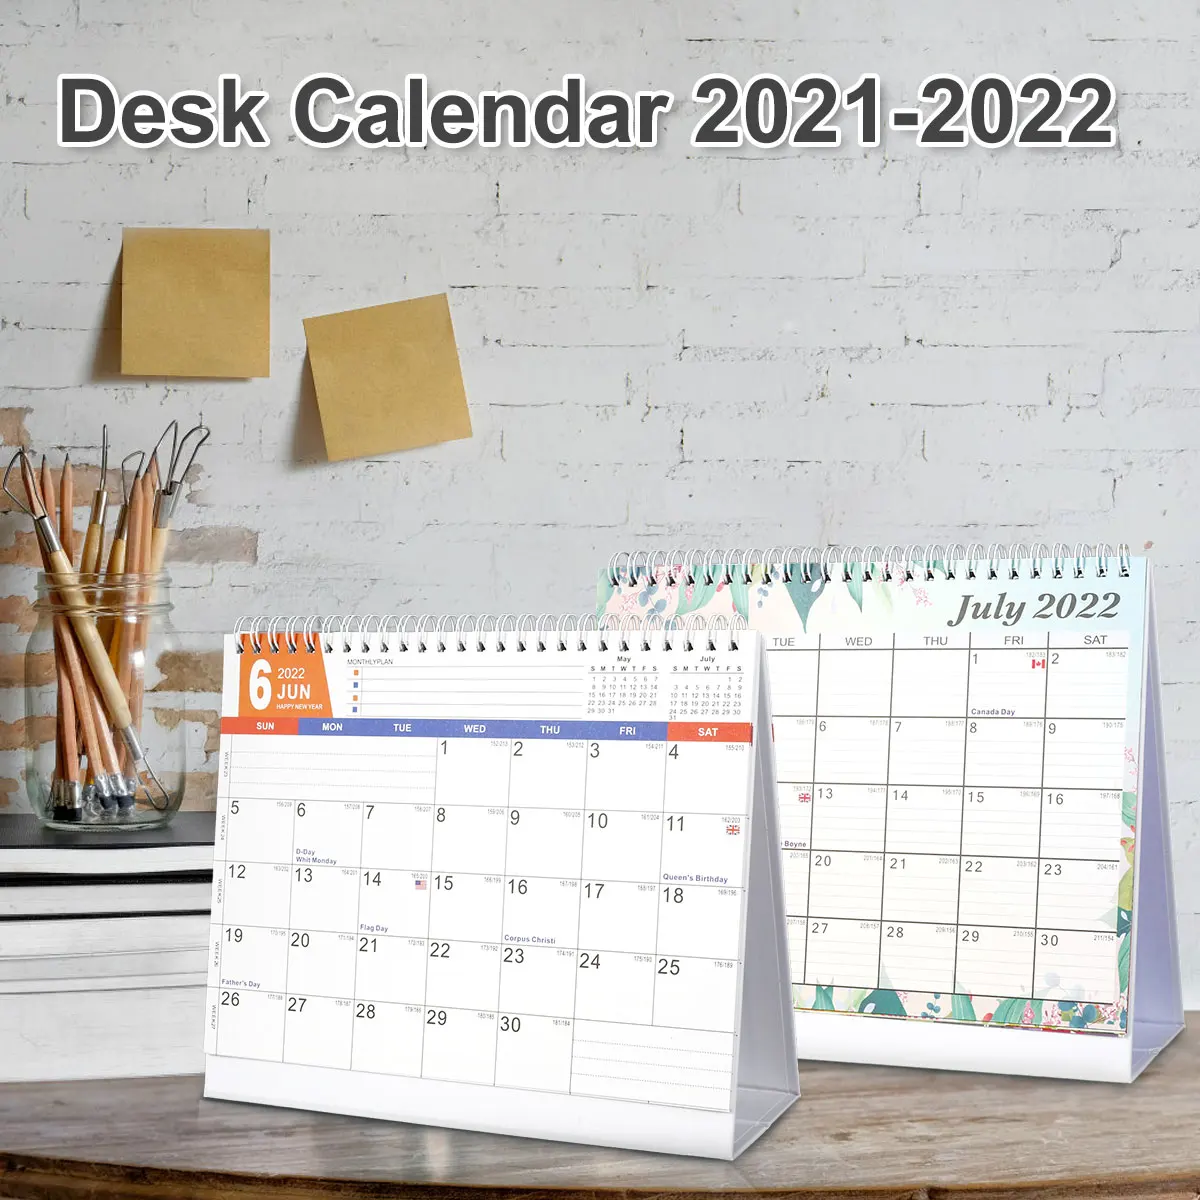 2021 2022 Desk Calendar Double Side Flip Table Calendar Daily Scheduler Table Planner Yearly Agenda Organizer with Memo Pages